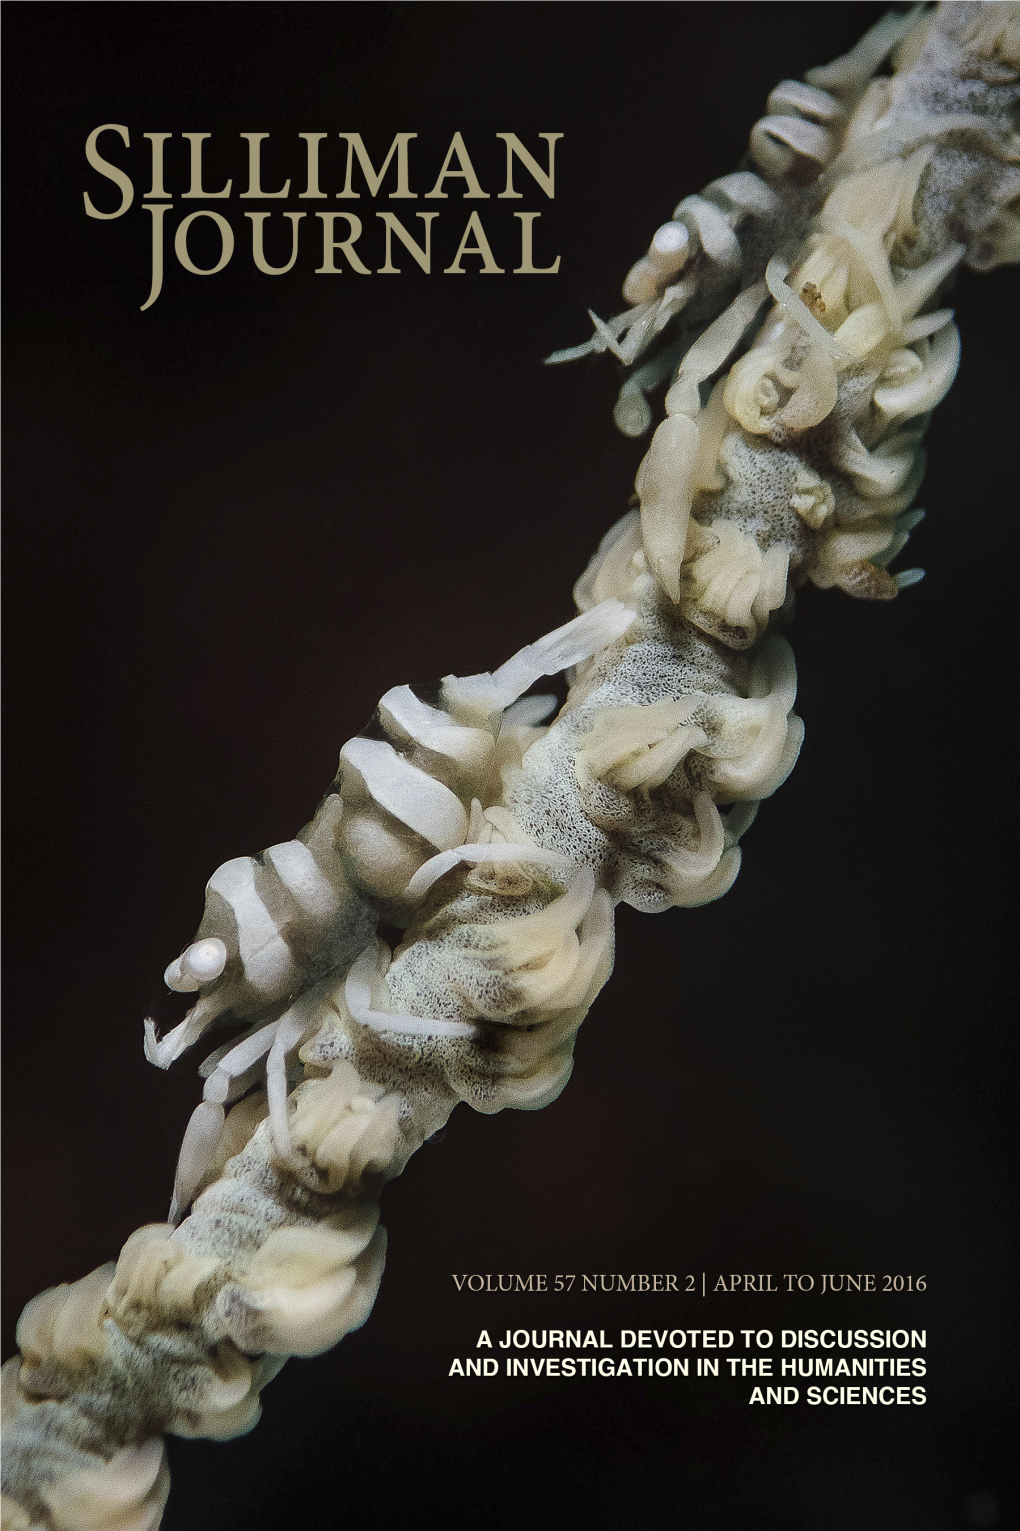 Silliman Journal a JOURNAL DEVOTED to DISCUSSION and INVESTIGATION in the HUMANITIES and SCIENCES VOLUME 57 NUMBER 2 | APRIL to JUNE 2016